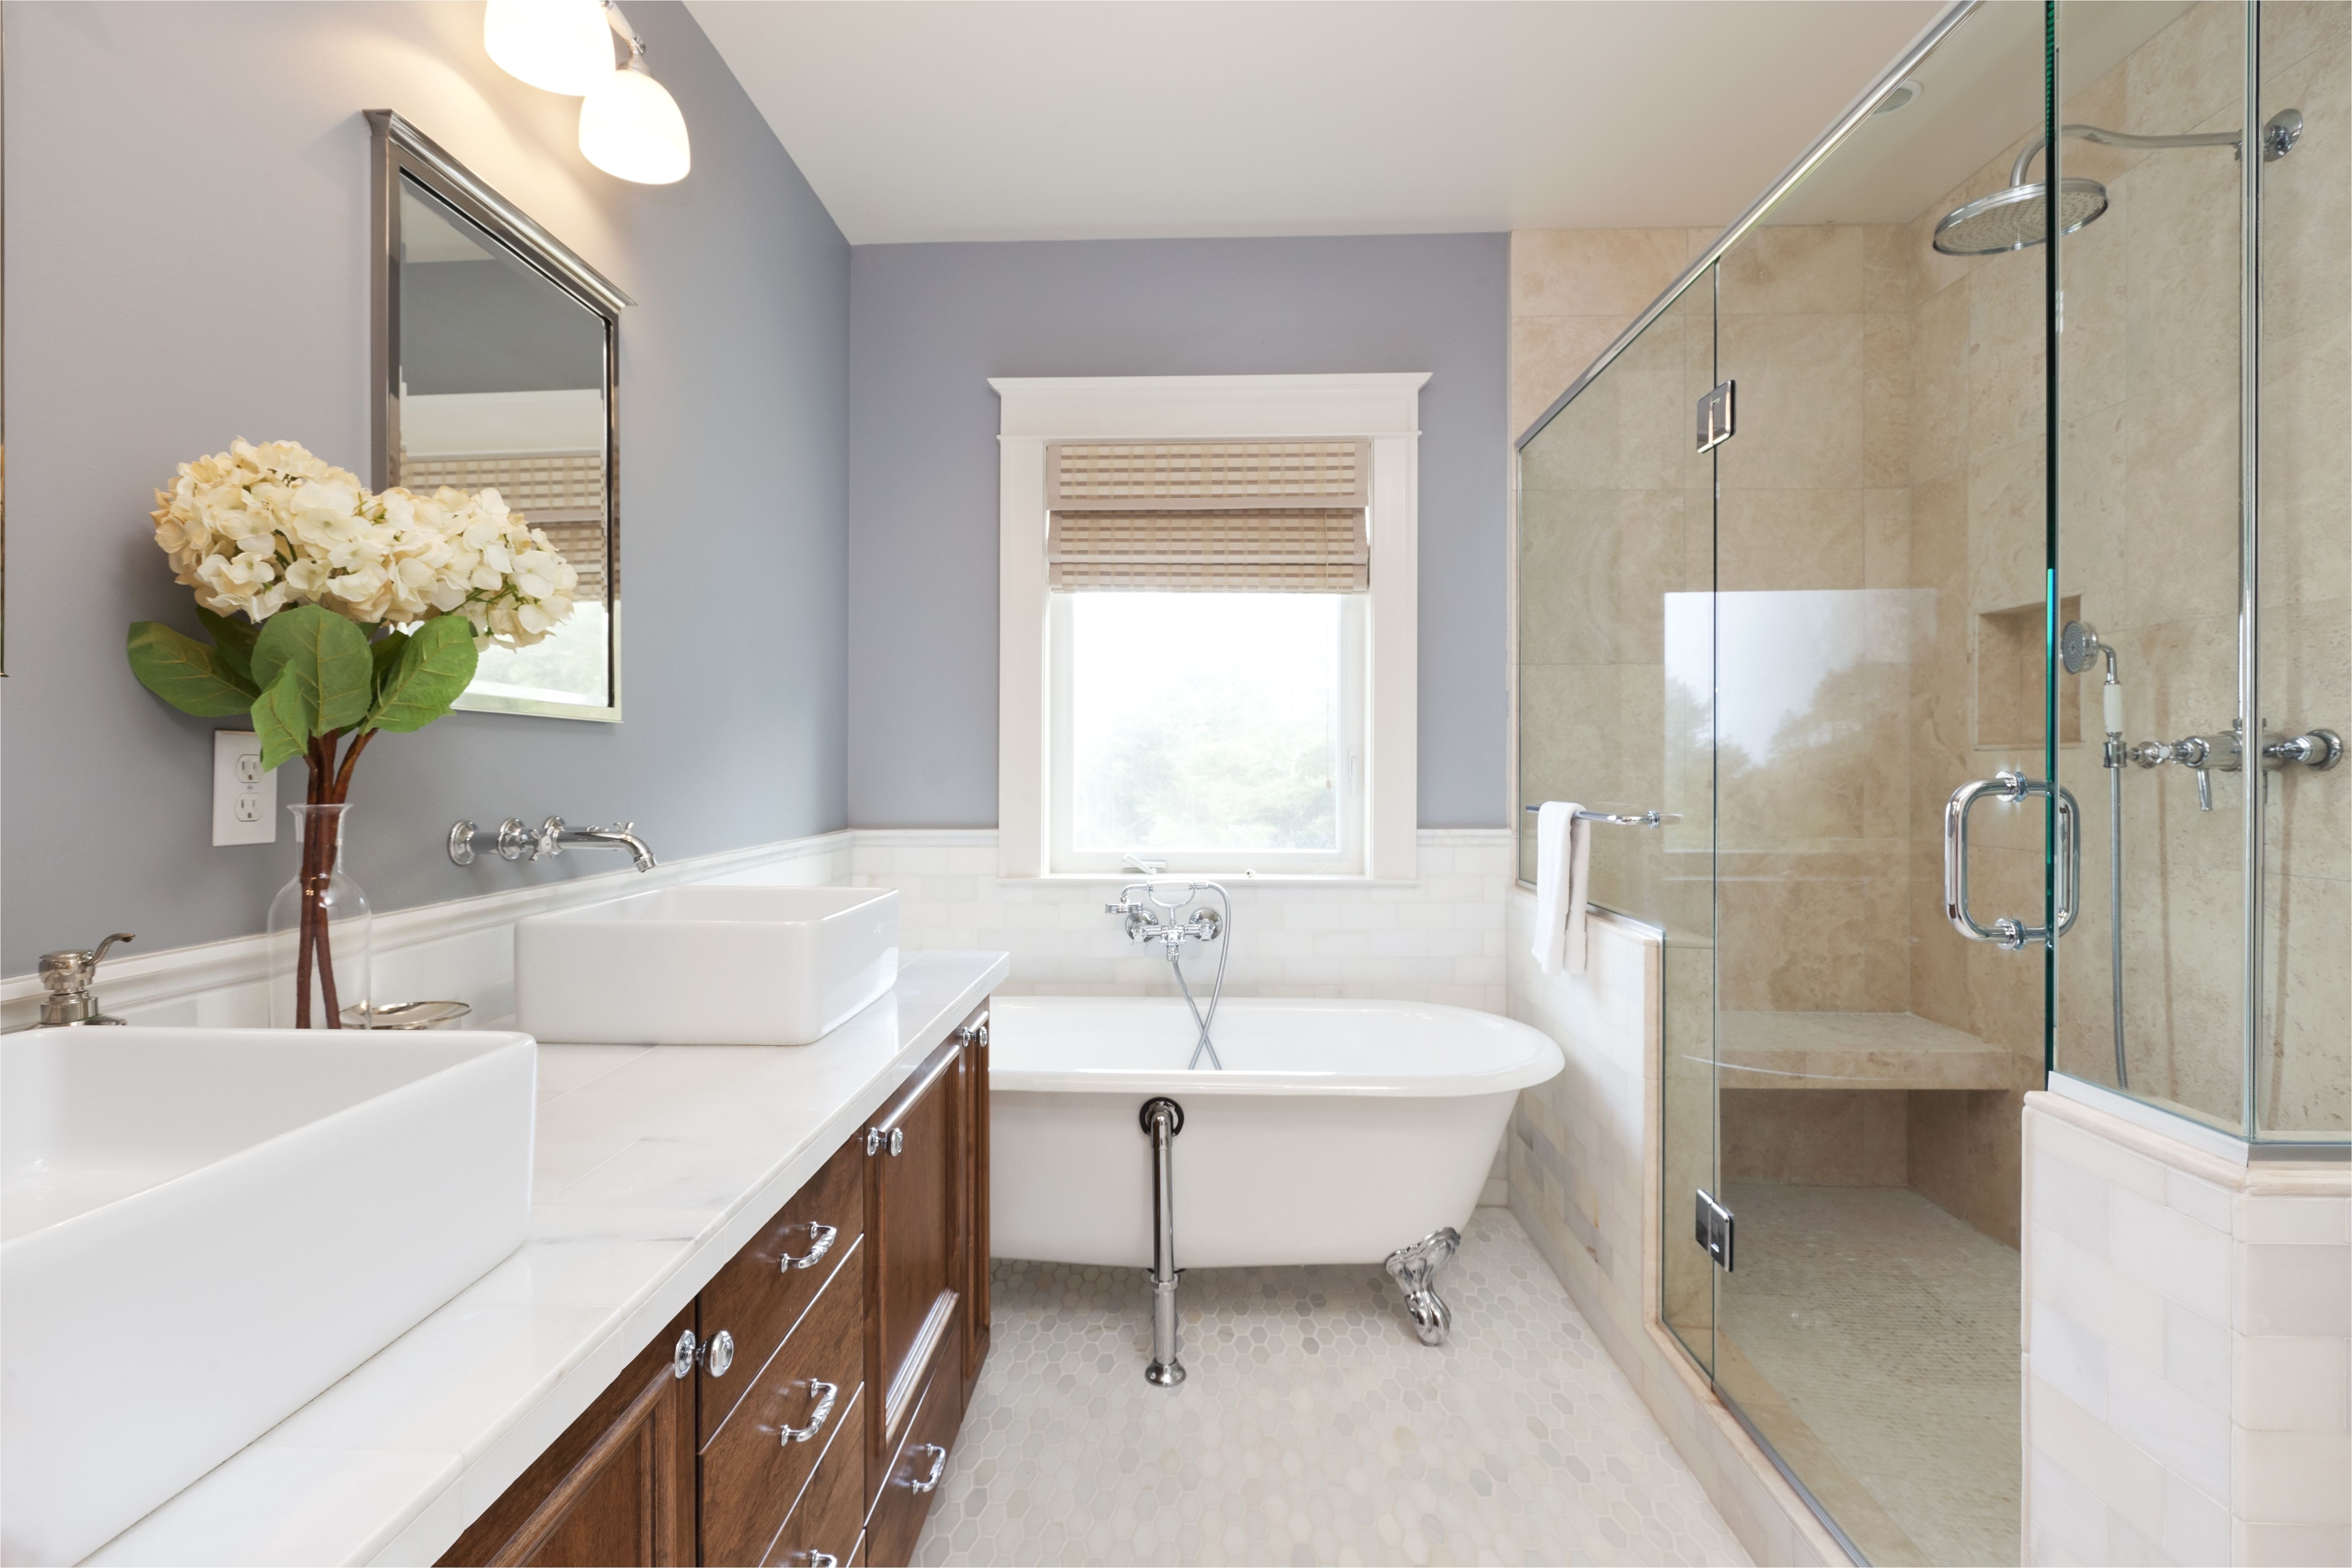 Can I Paint My Bathtub Walk In Shower Vs Tub which Should You Choose